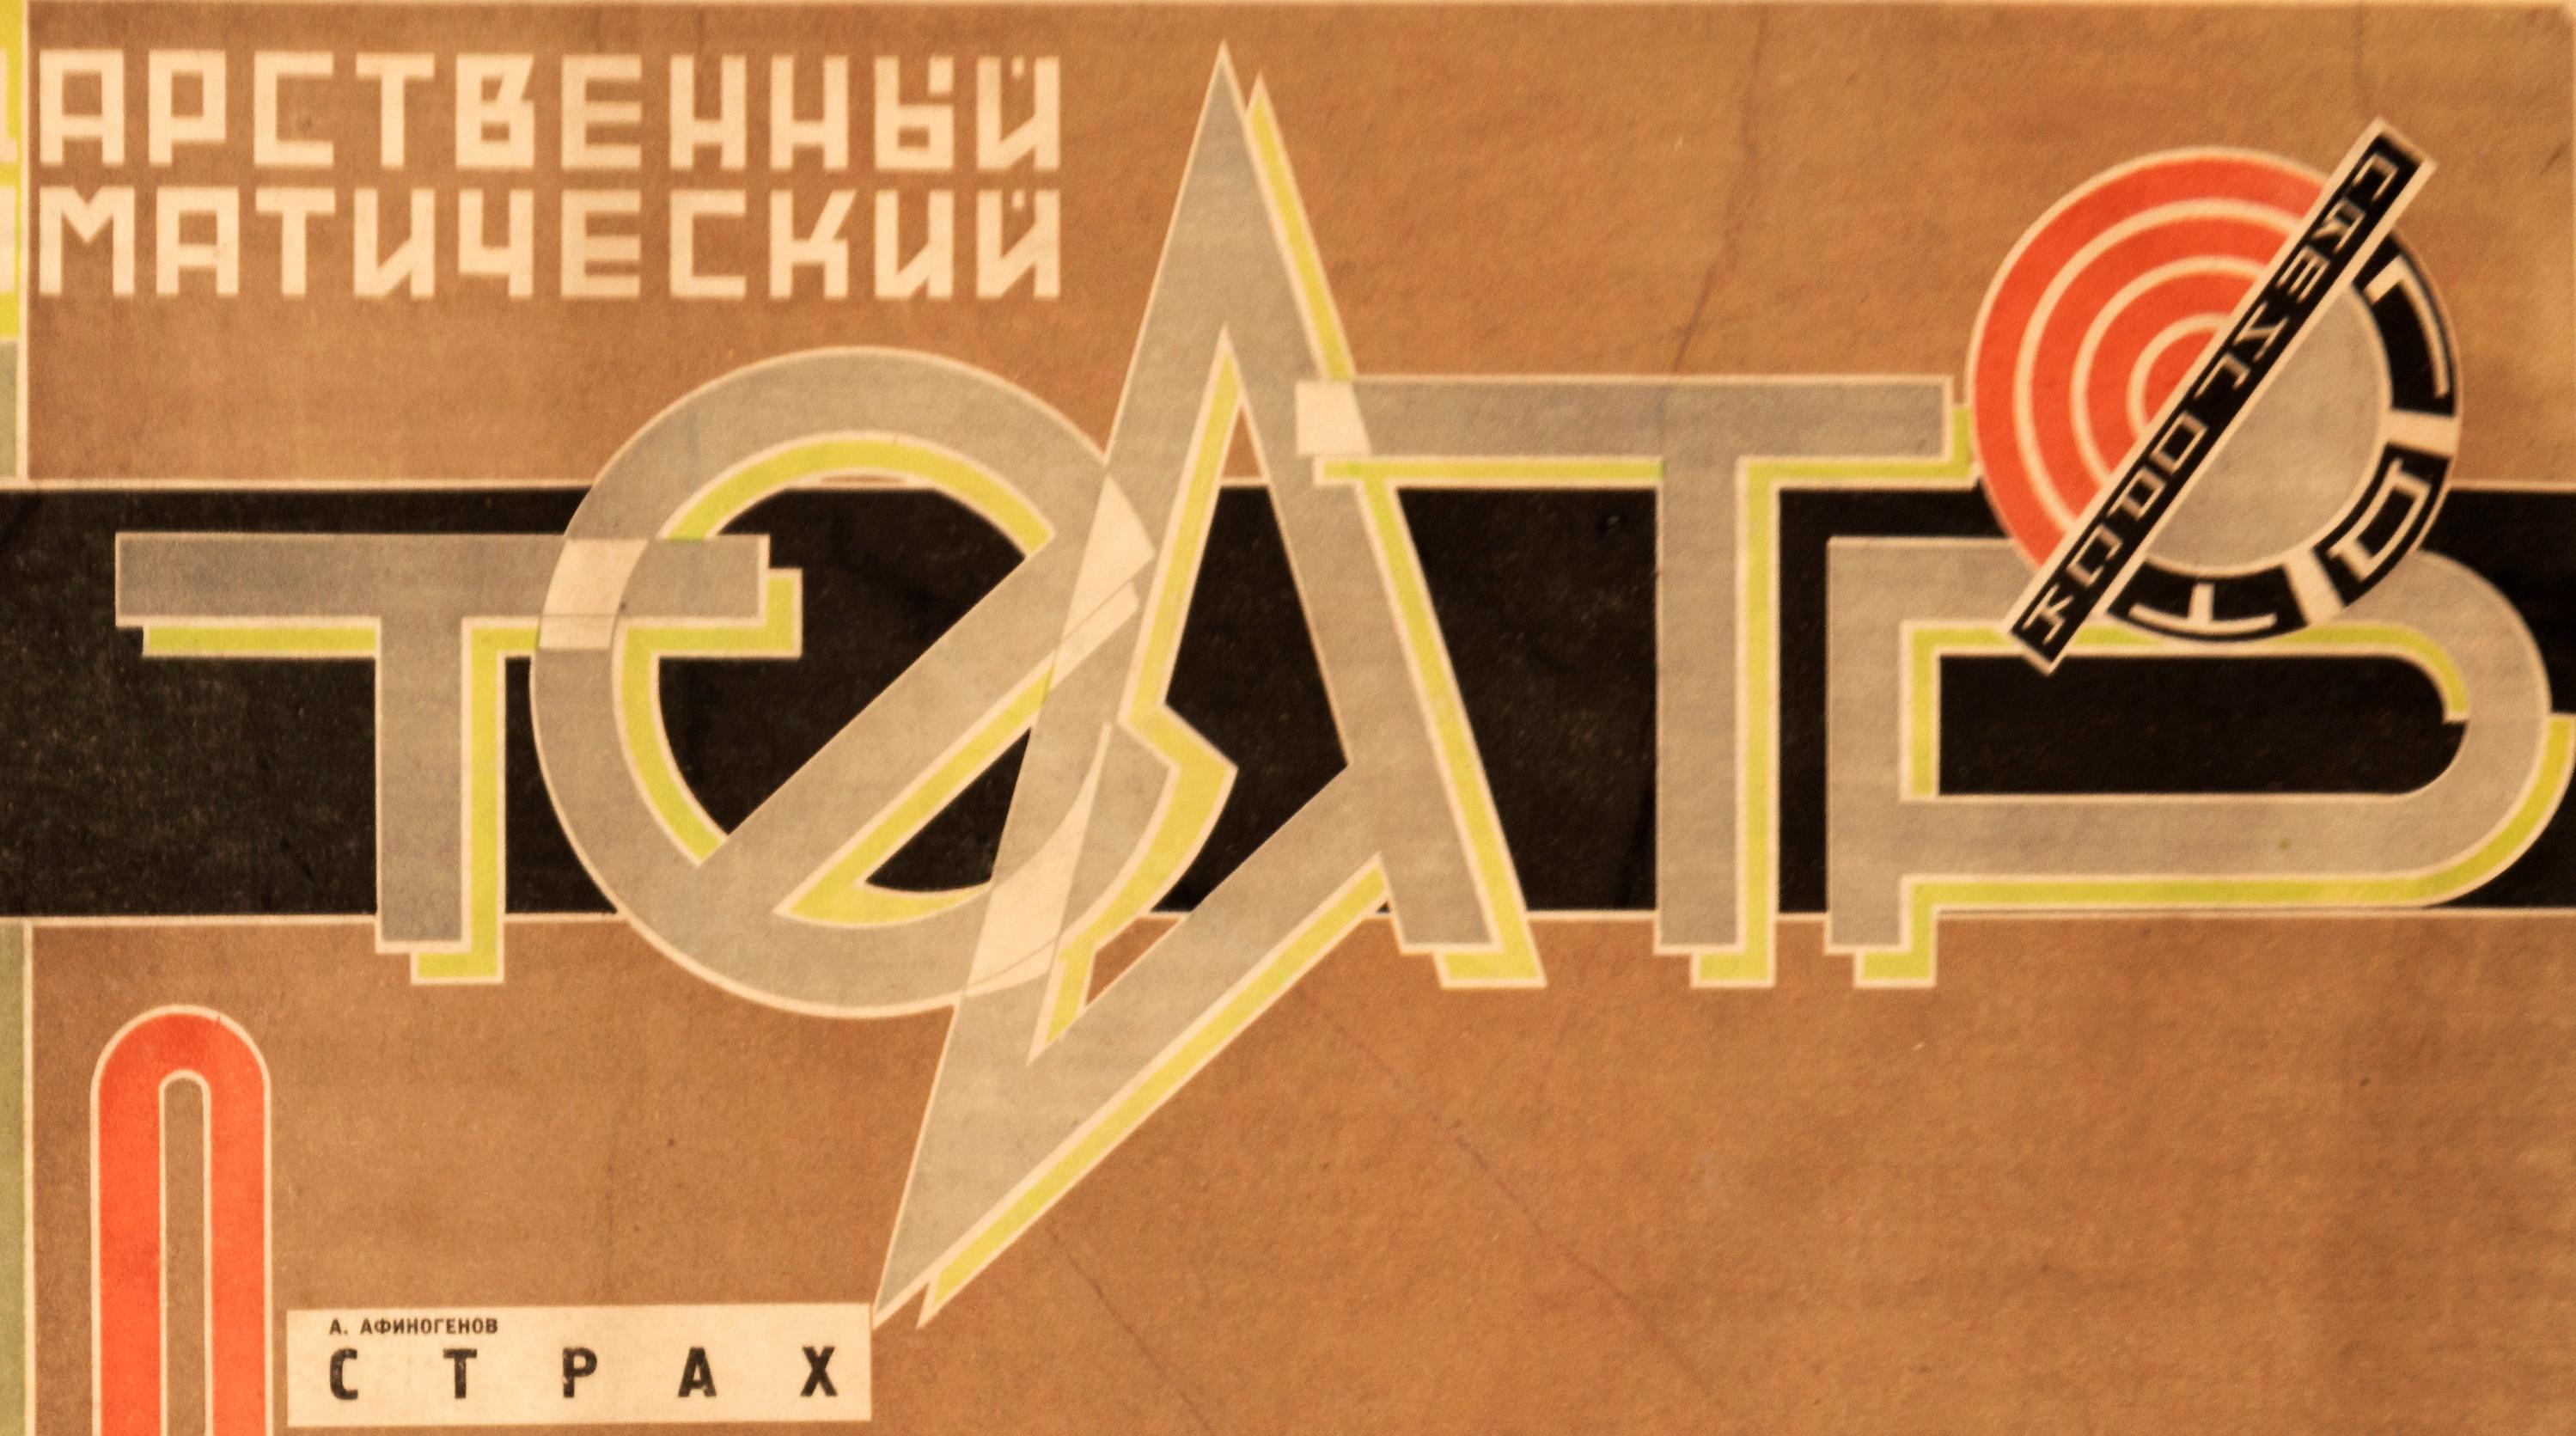 This original constructivist poster designed by the Russian artist F. Lupach in 1932 announces the opening of the state dramatic theatre in Pyatigorsk. Though little is known about Lupach, his use of strong, stylized typography and geometric layout